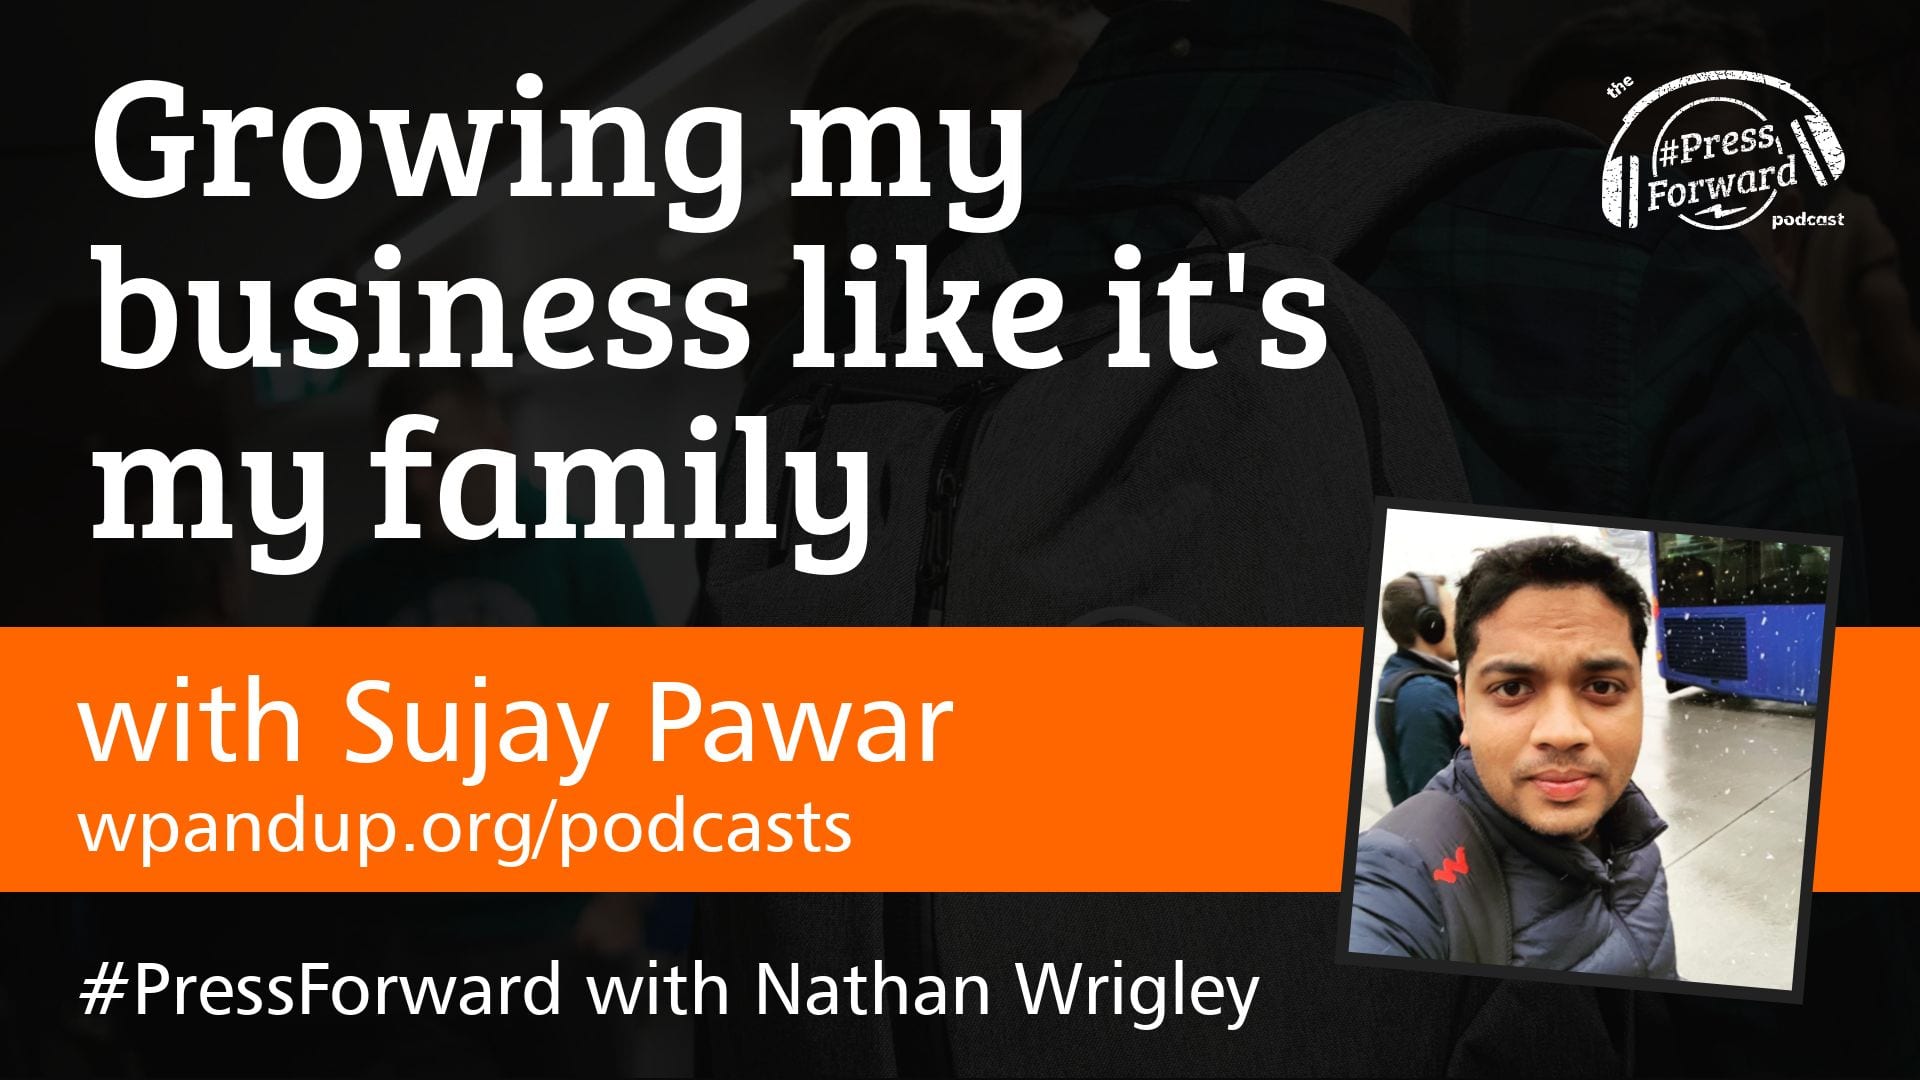 Growing my business like it's my family - #024